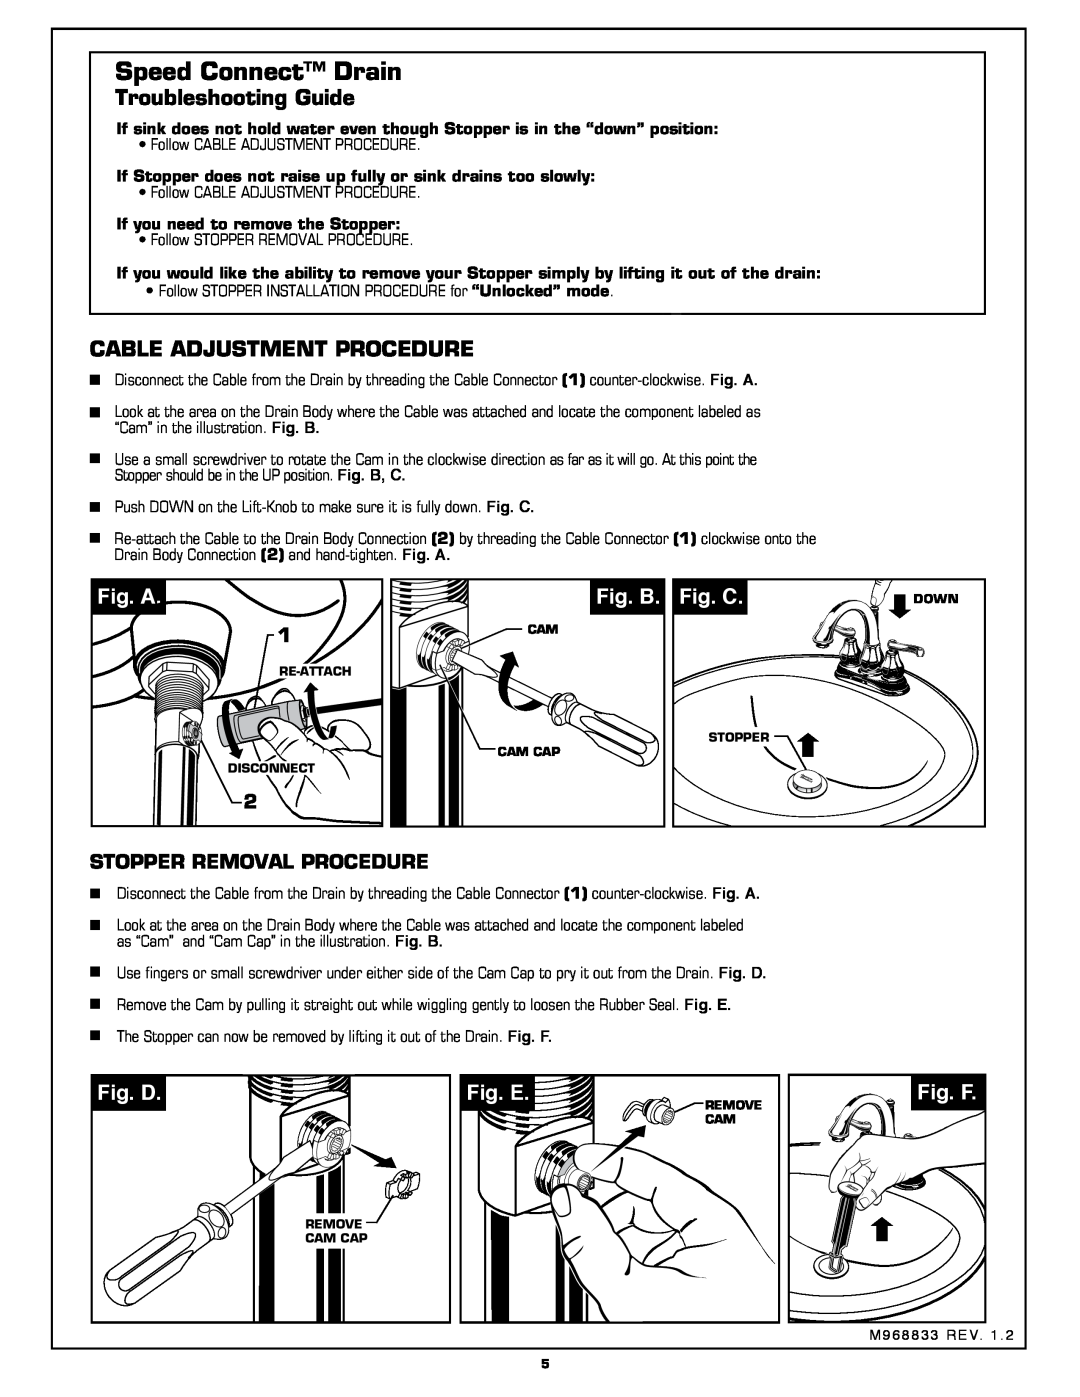 American Standard 6028.201 Troubleshooting Guide, Cable Adjustment Procedure, Fig. A, Fig. B. Fig. C, Fig. D, Fig. E 